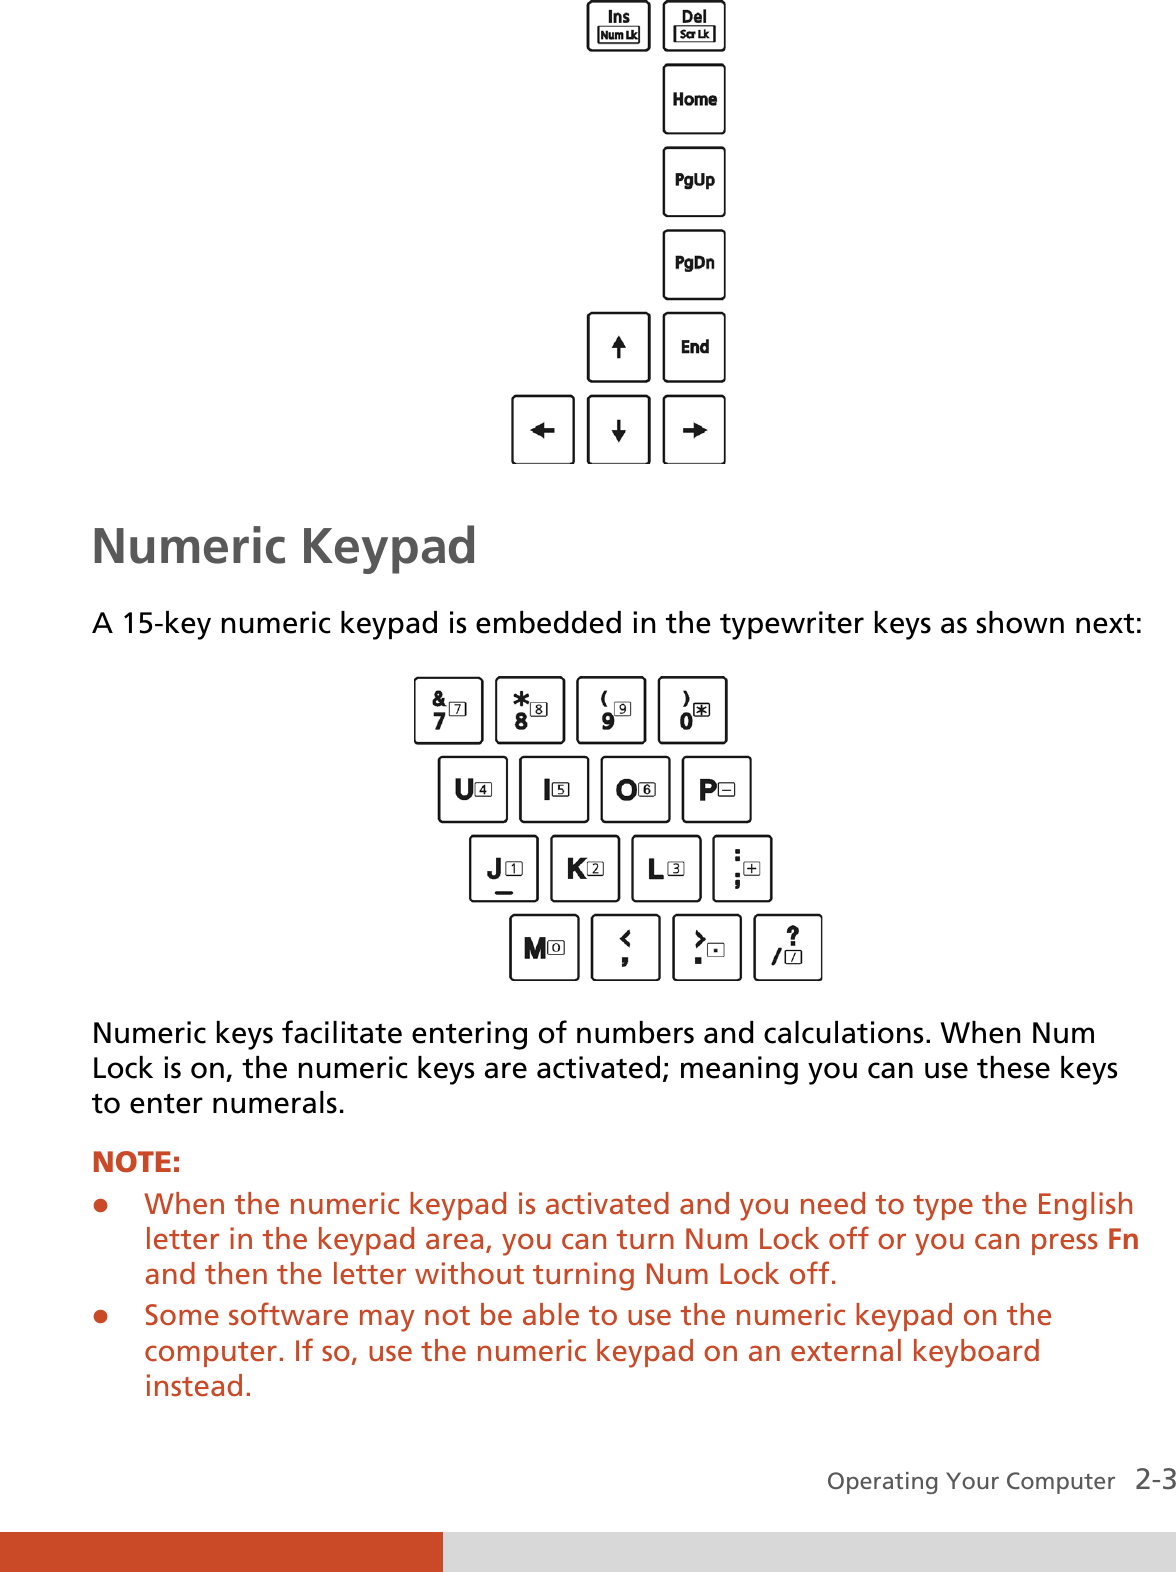  Operating Your Computer   2-3  Numeric Keypad A 15-key numeric keypad is embedded in the typewriter keys as shown next:  Numeric keys facilitate entering of numbers and calculations. When Num Lock is on, the numeric keys are activated; meaning you can use these keys to enter numerals. NOTE: z When the numeric keypad is activated and you need to type the English letter in the keypad area, you can turn Num Lock off or you can press Fn and then the letter without turning Num Lock off. z Some software may not be able to use the numeric keypad on the computer. If so, use the numeric keypad on an external keyboard instead. 